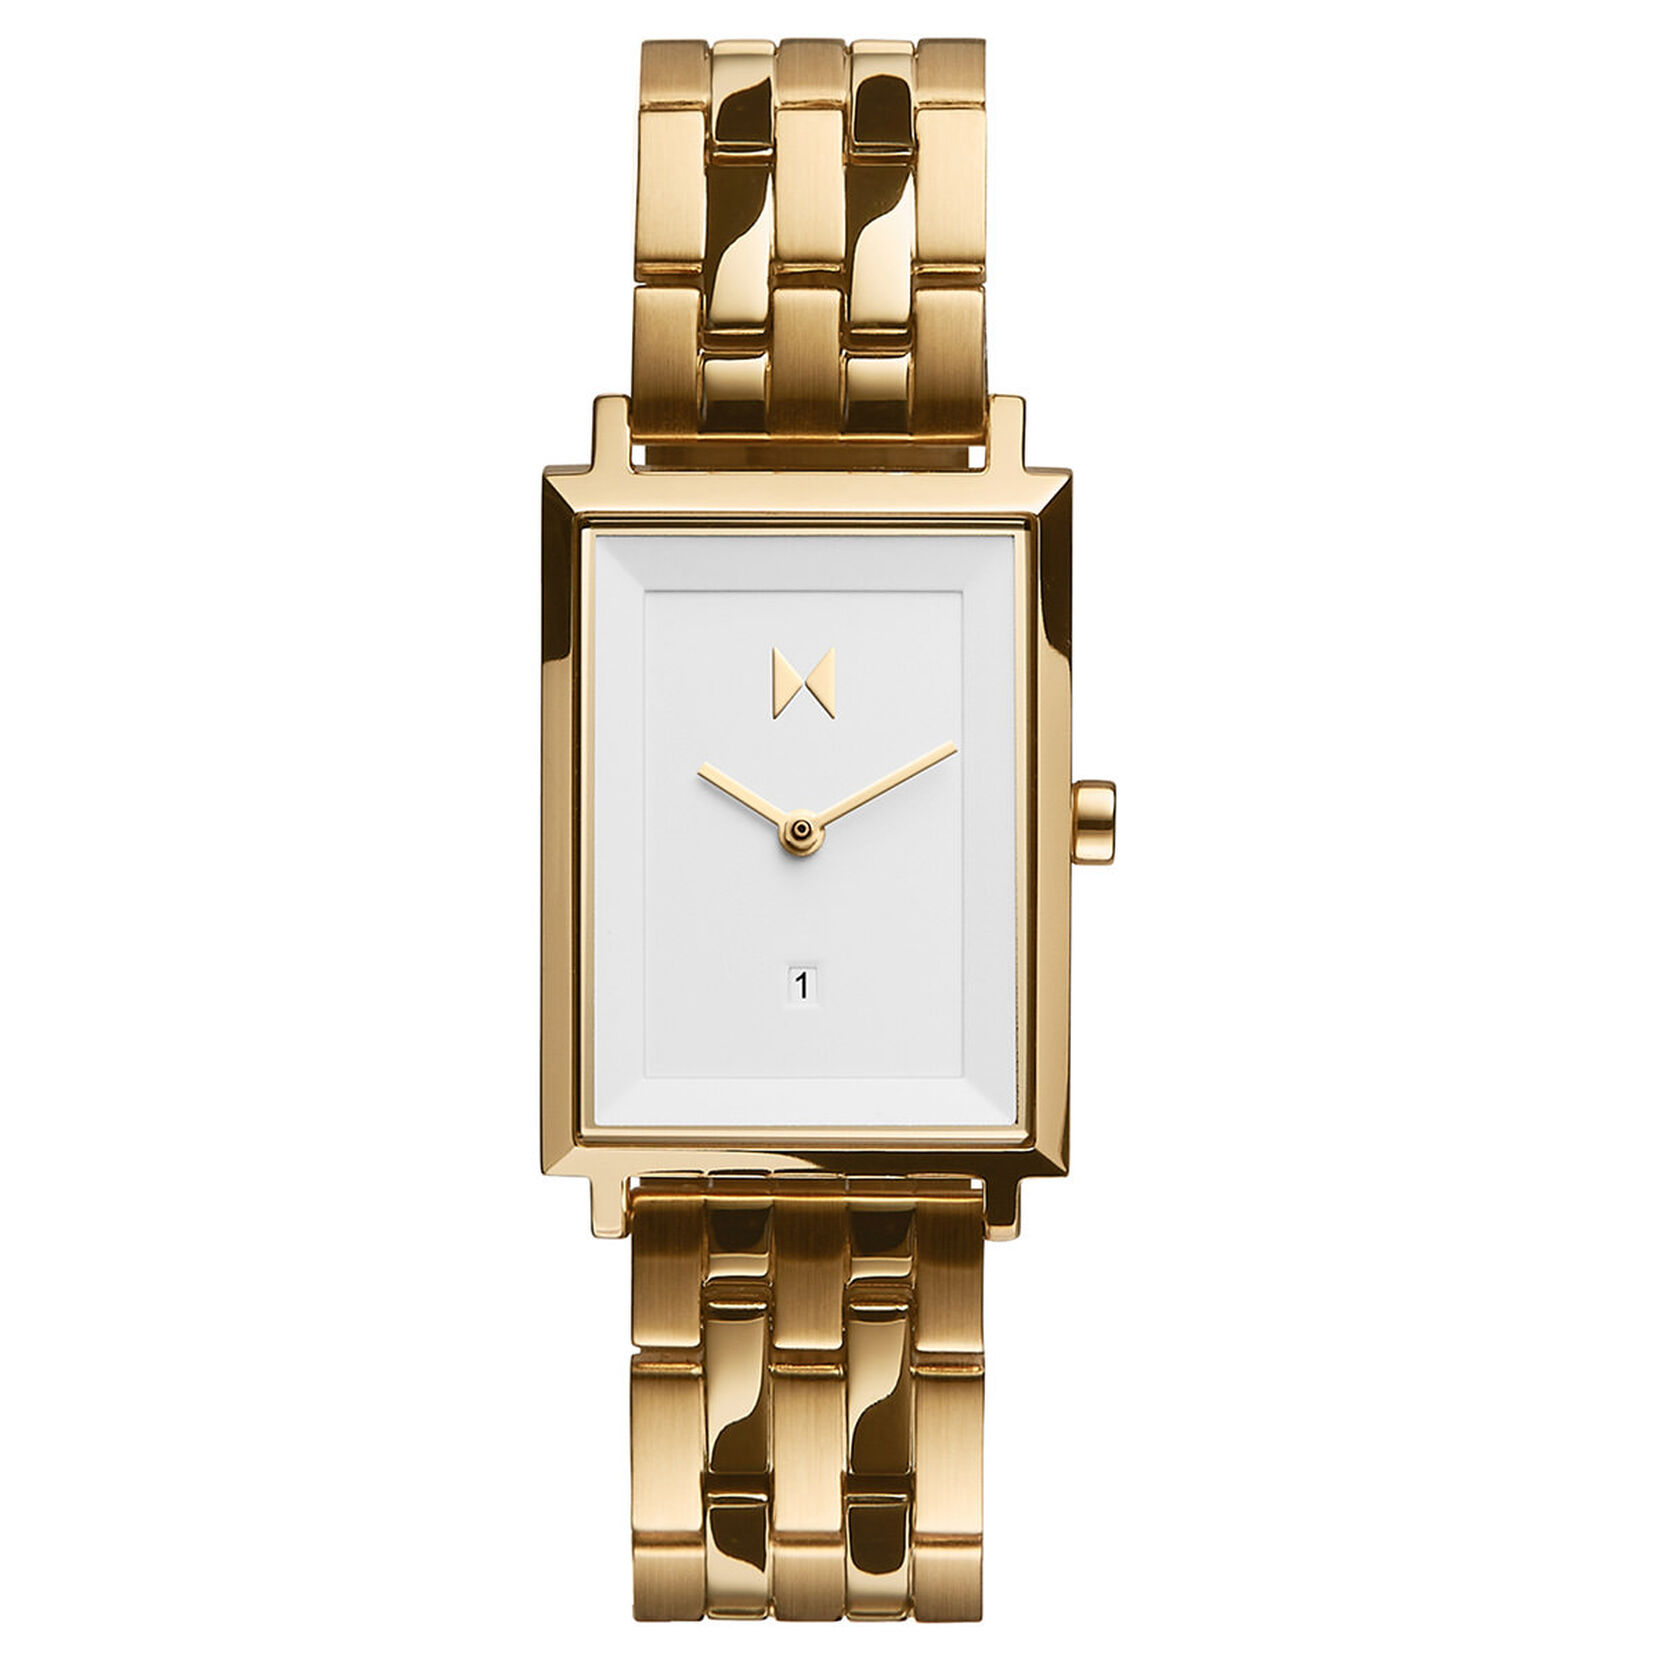 Signature Square Charlie Gold Watch, Women's Watches